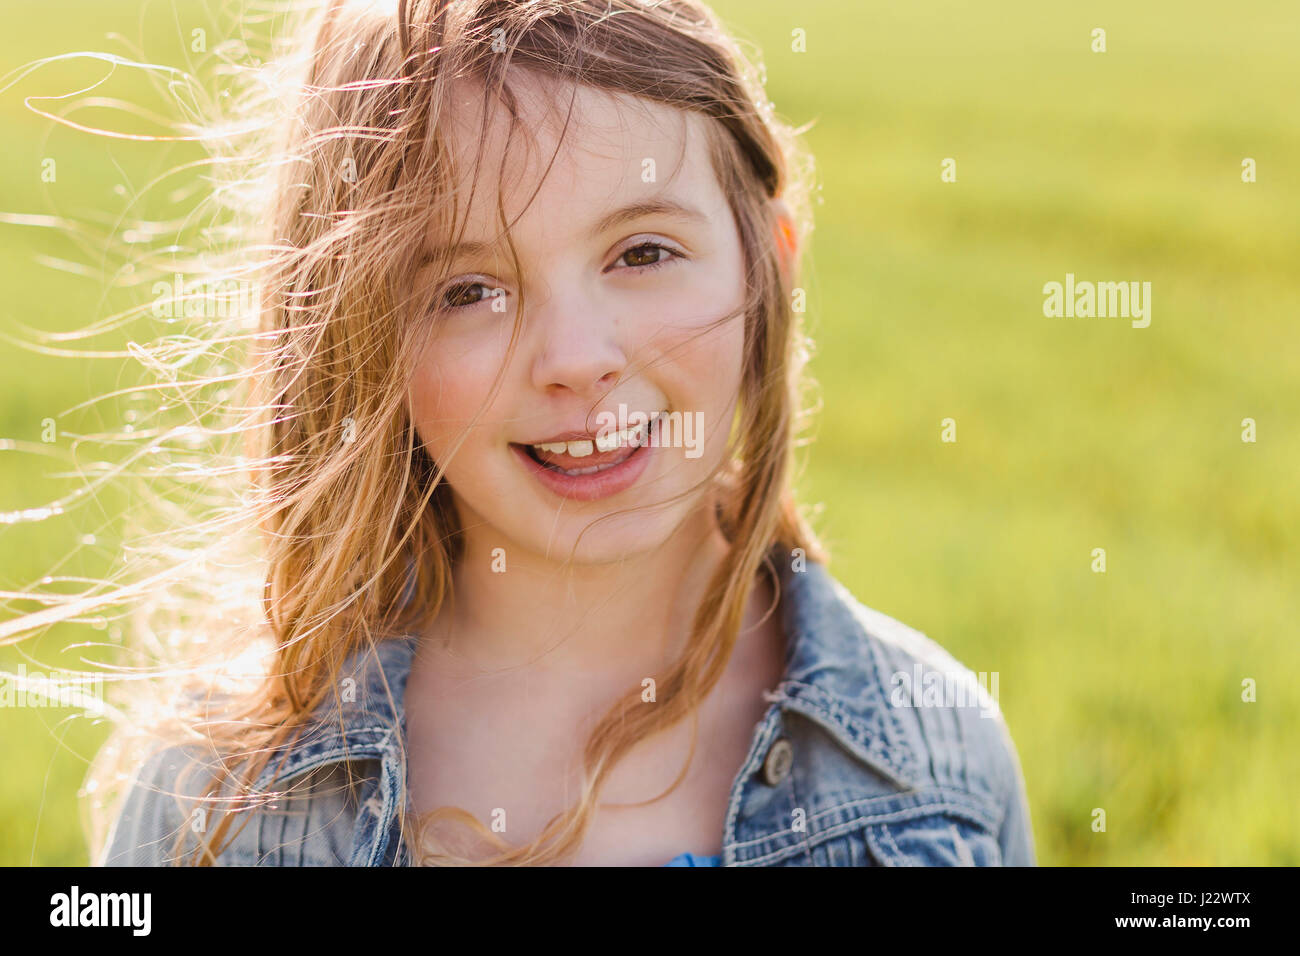 Portrait of smiling girl with blowing hair Stock Photo